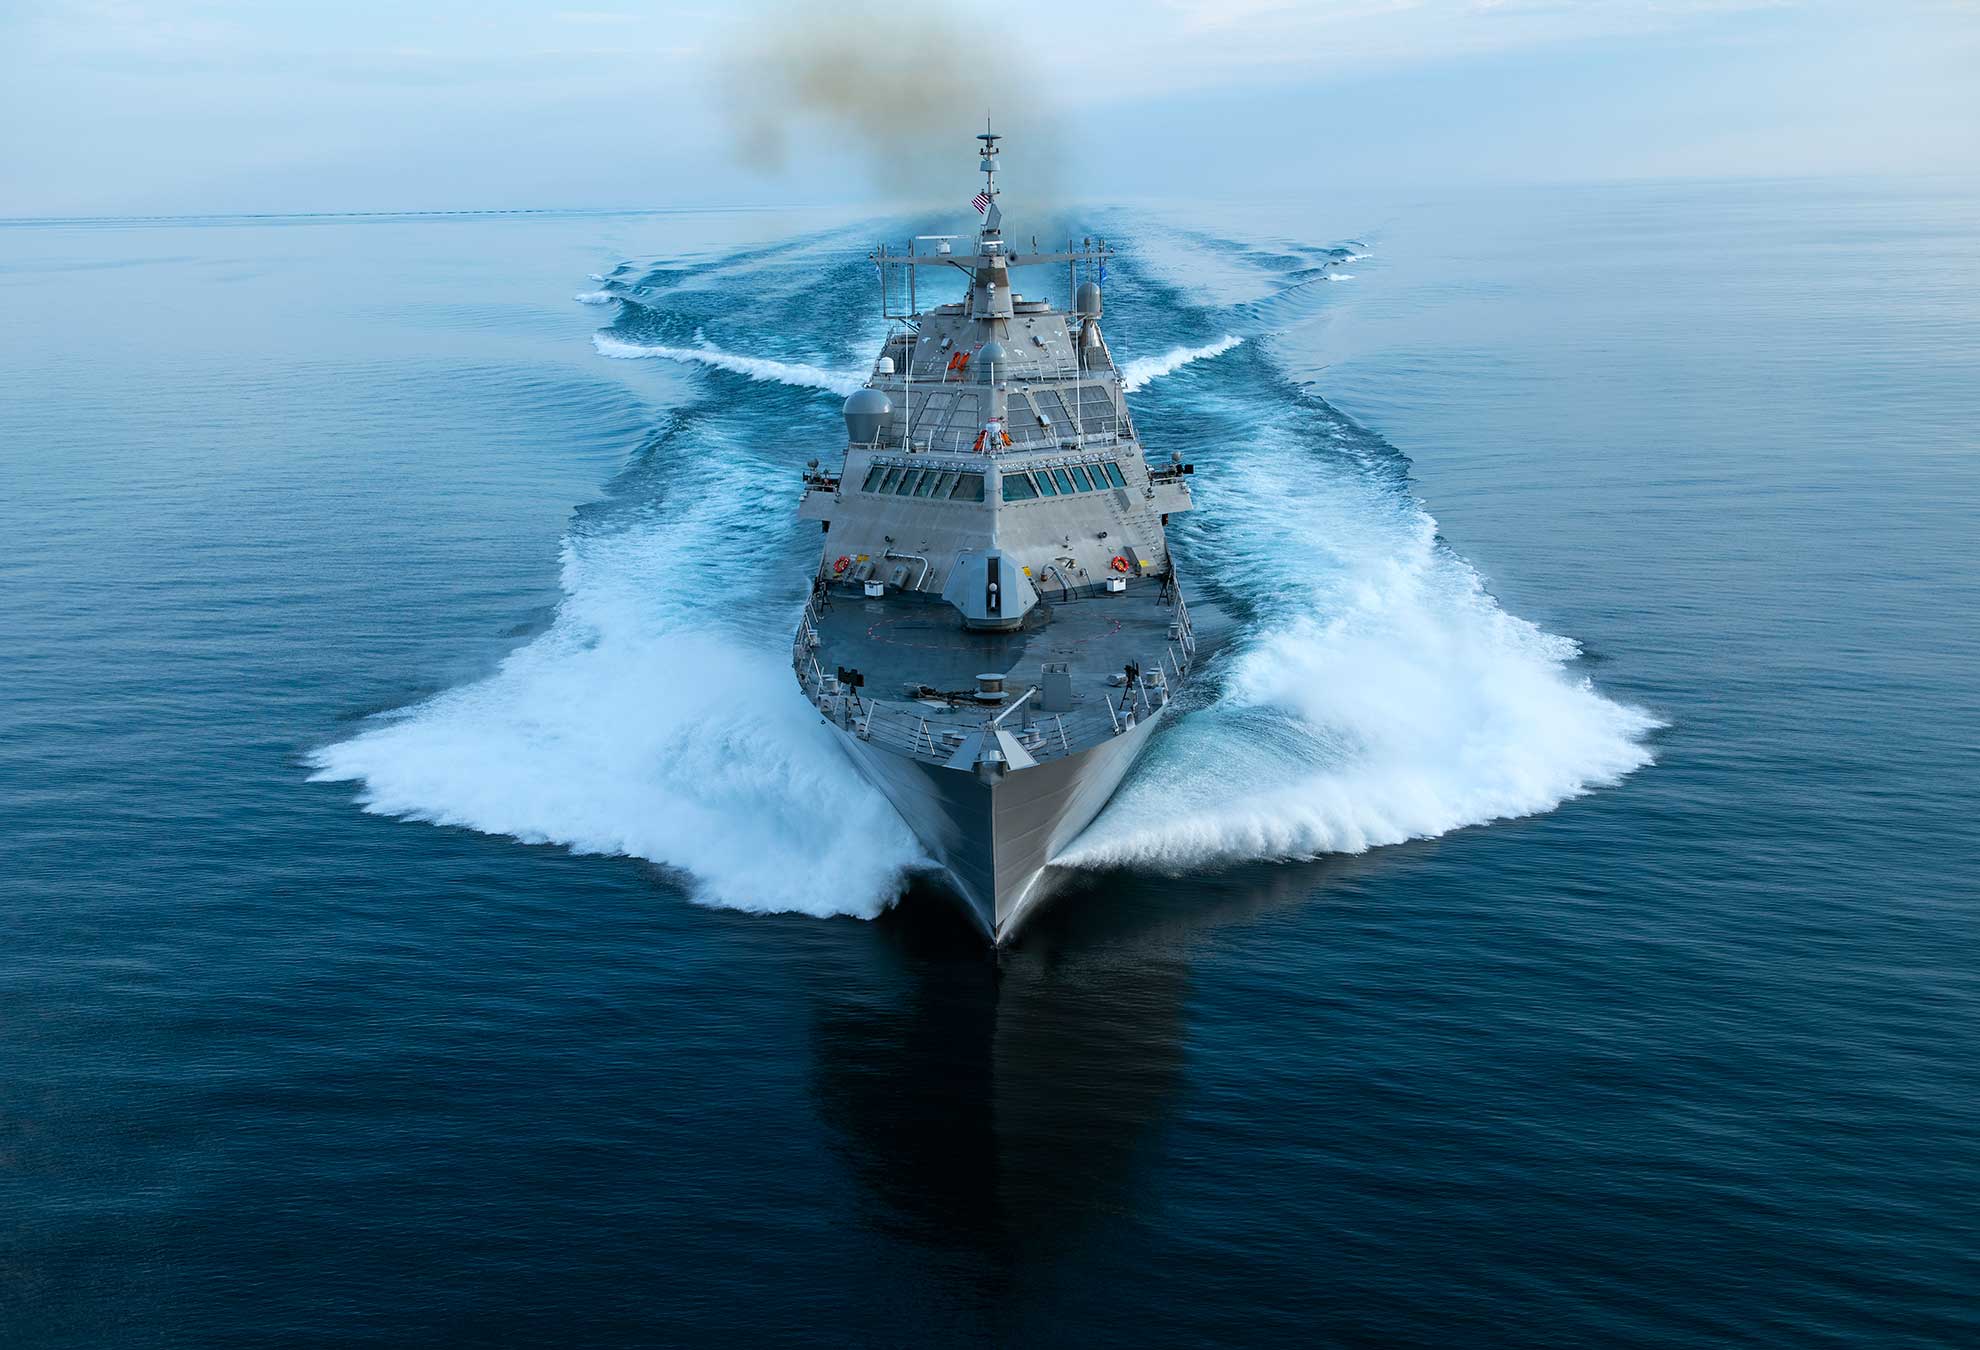 Lake Michigan (July 11, 2018) The future littoral combat ship USS Wichita (LCS 13) conducts acceptance trials, which are the last significant milestone before a ship is delivered to the Navy. LCS-13 is a fast, agile, focused-mission platform designed for operation in near-shore environments as well as the open-ocean. It is designed to defeat asymmetric threats such as mines, quiet diesel submarines and fast surface craft -- U.S. Navy photo courtesy of Lockheed Martin. -